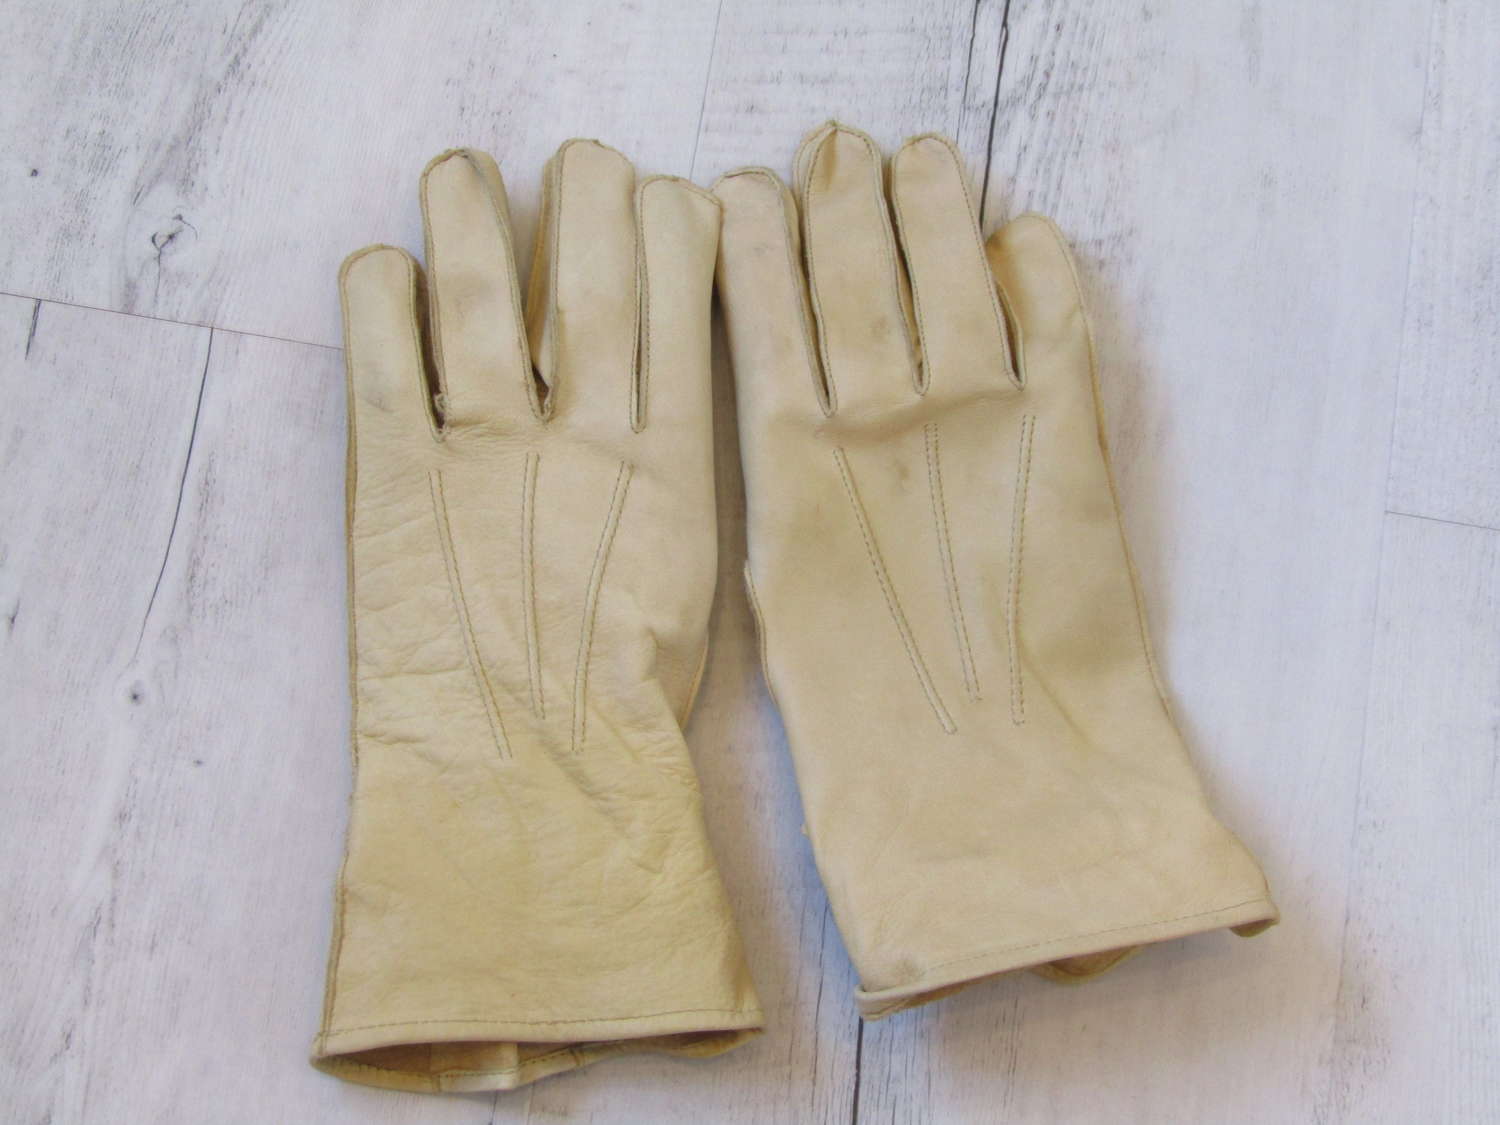 A pair of reproduction paratrooper gloves